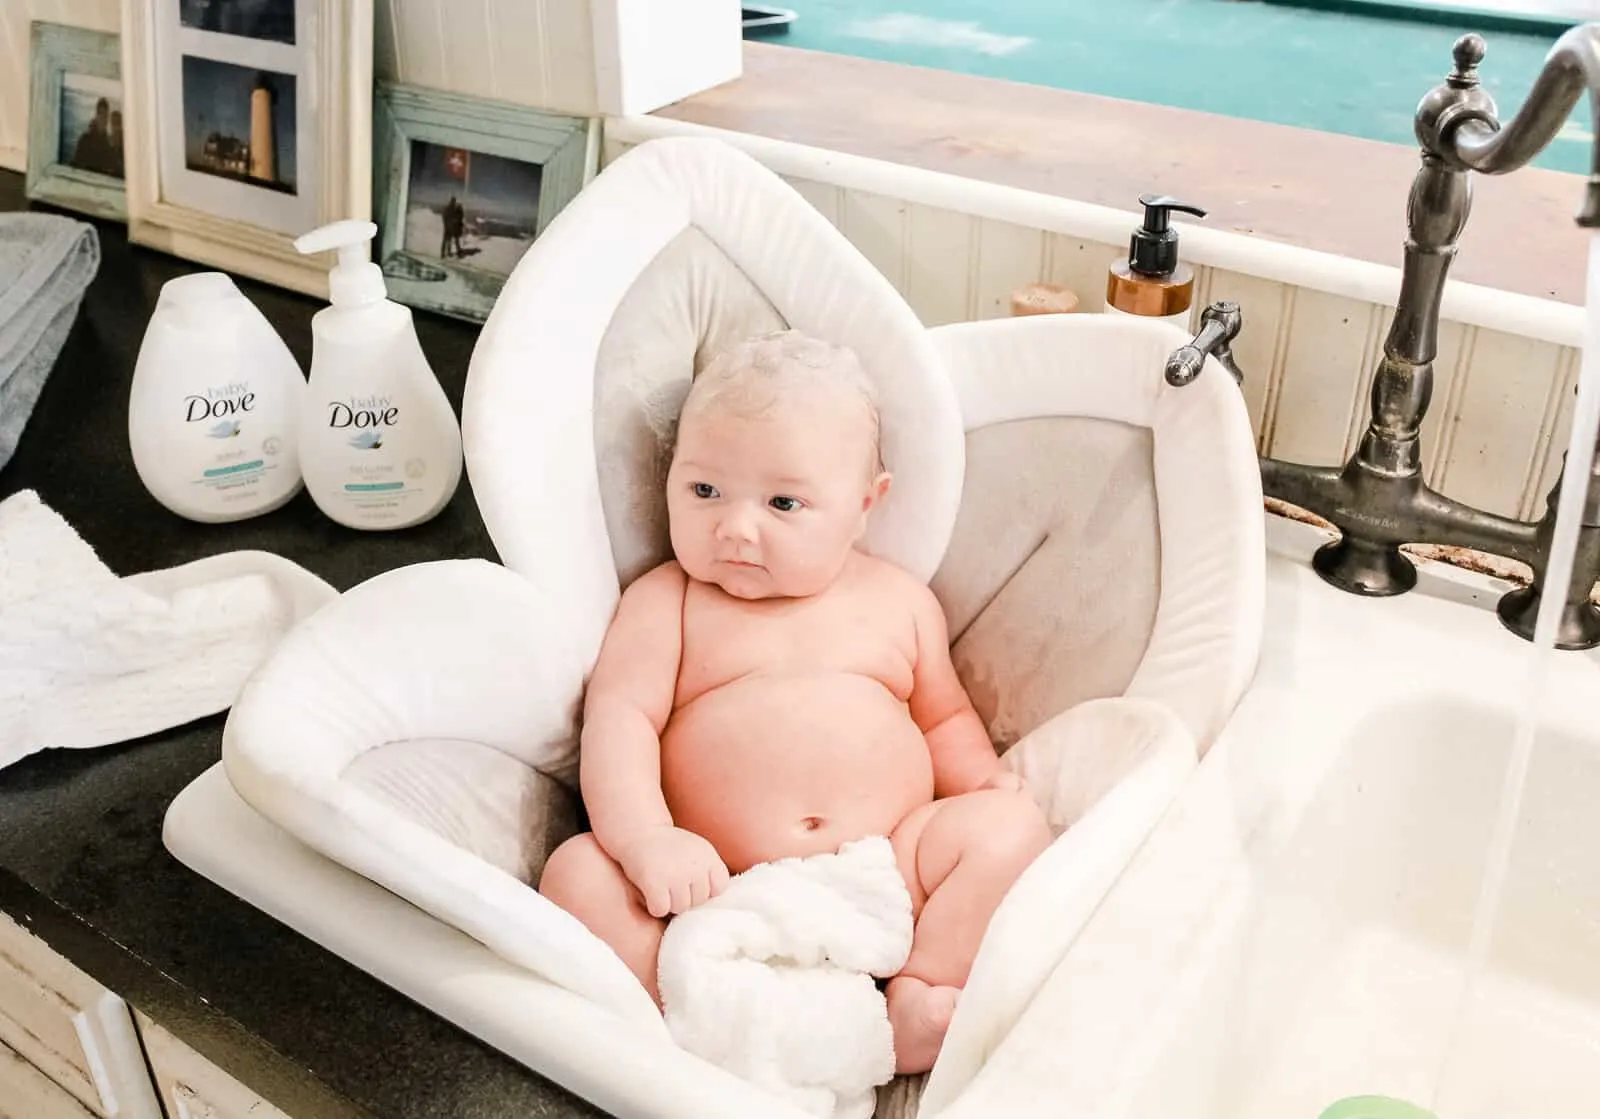 Baby sits in bath on plush sink liner.